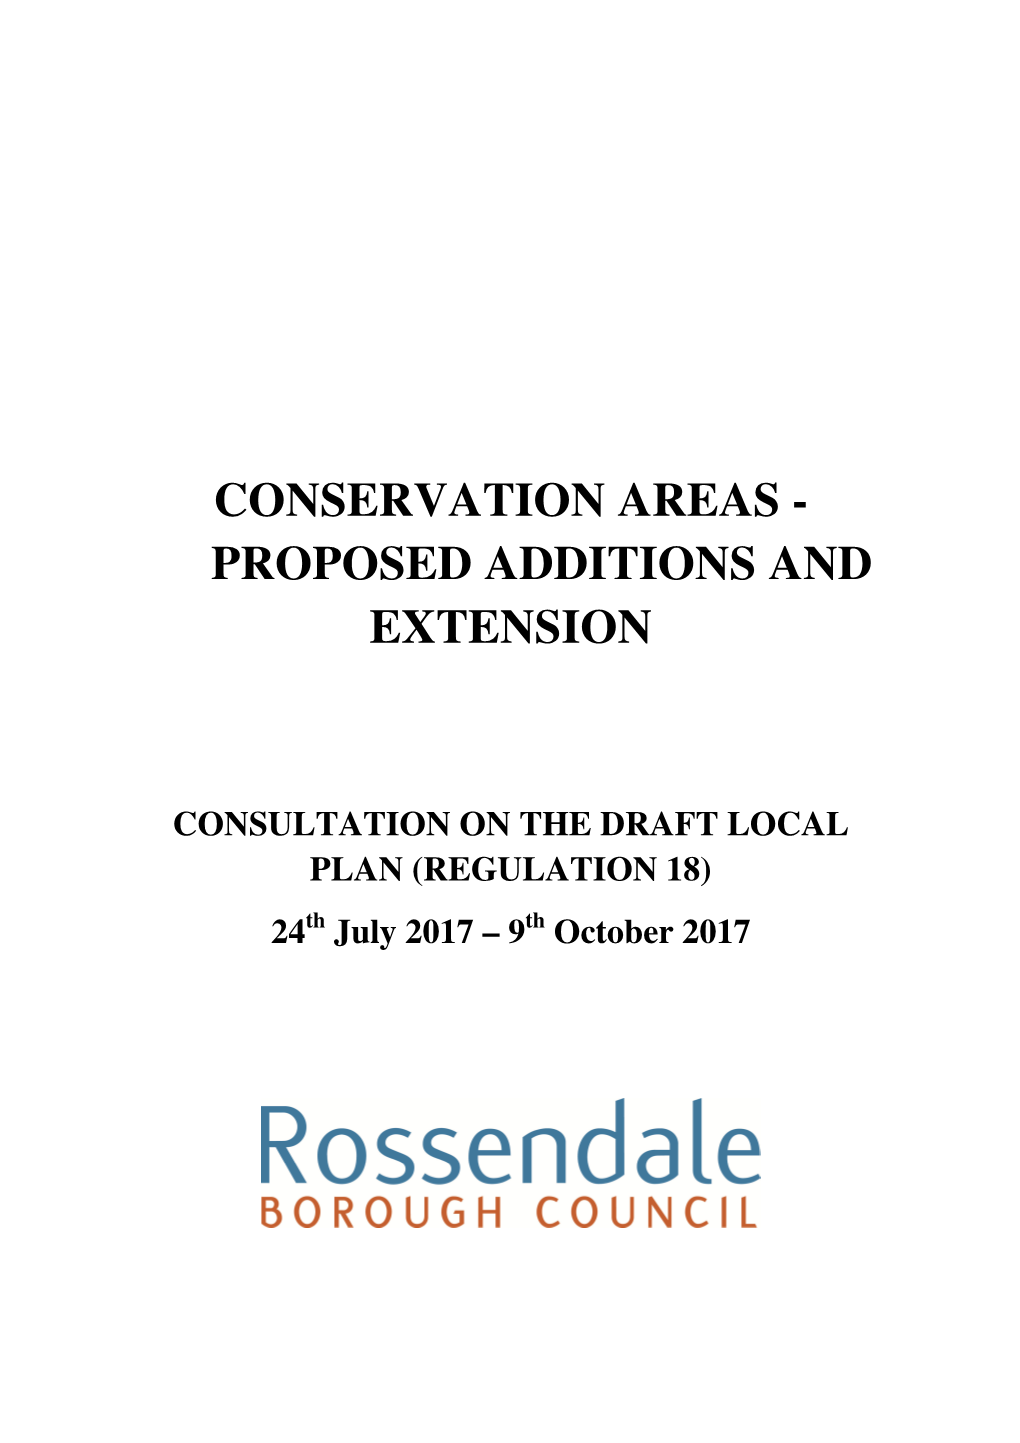 Conservation Areas - Proposed Additions and Extension